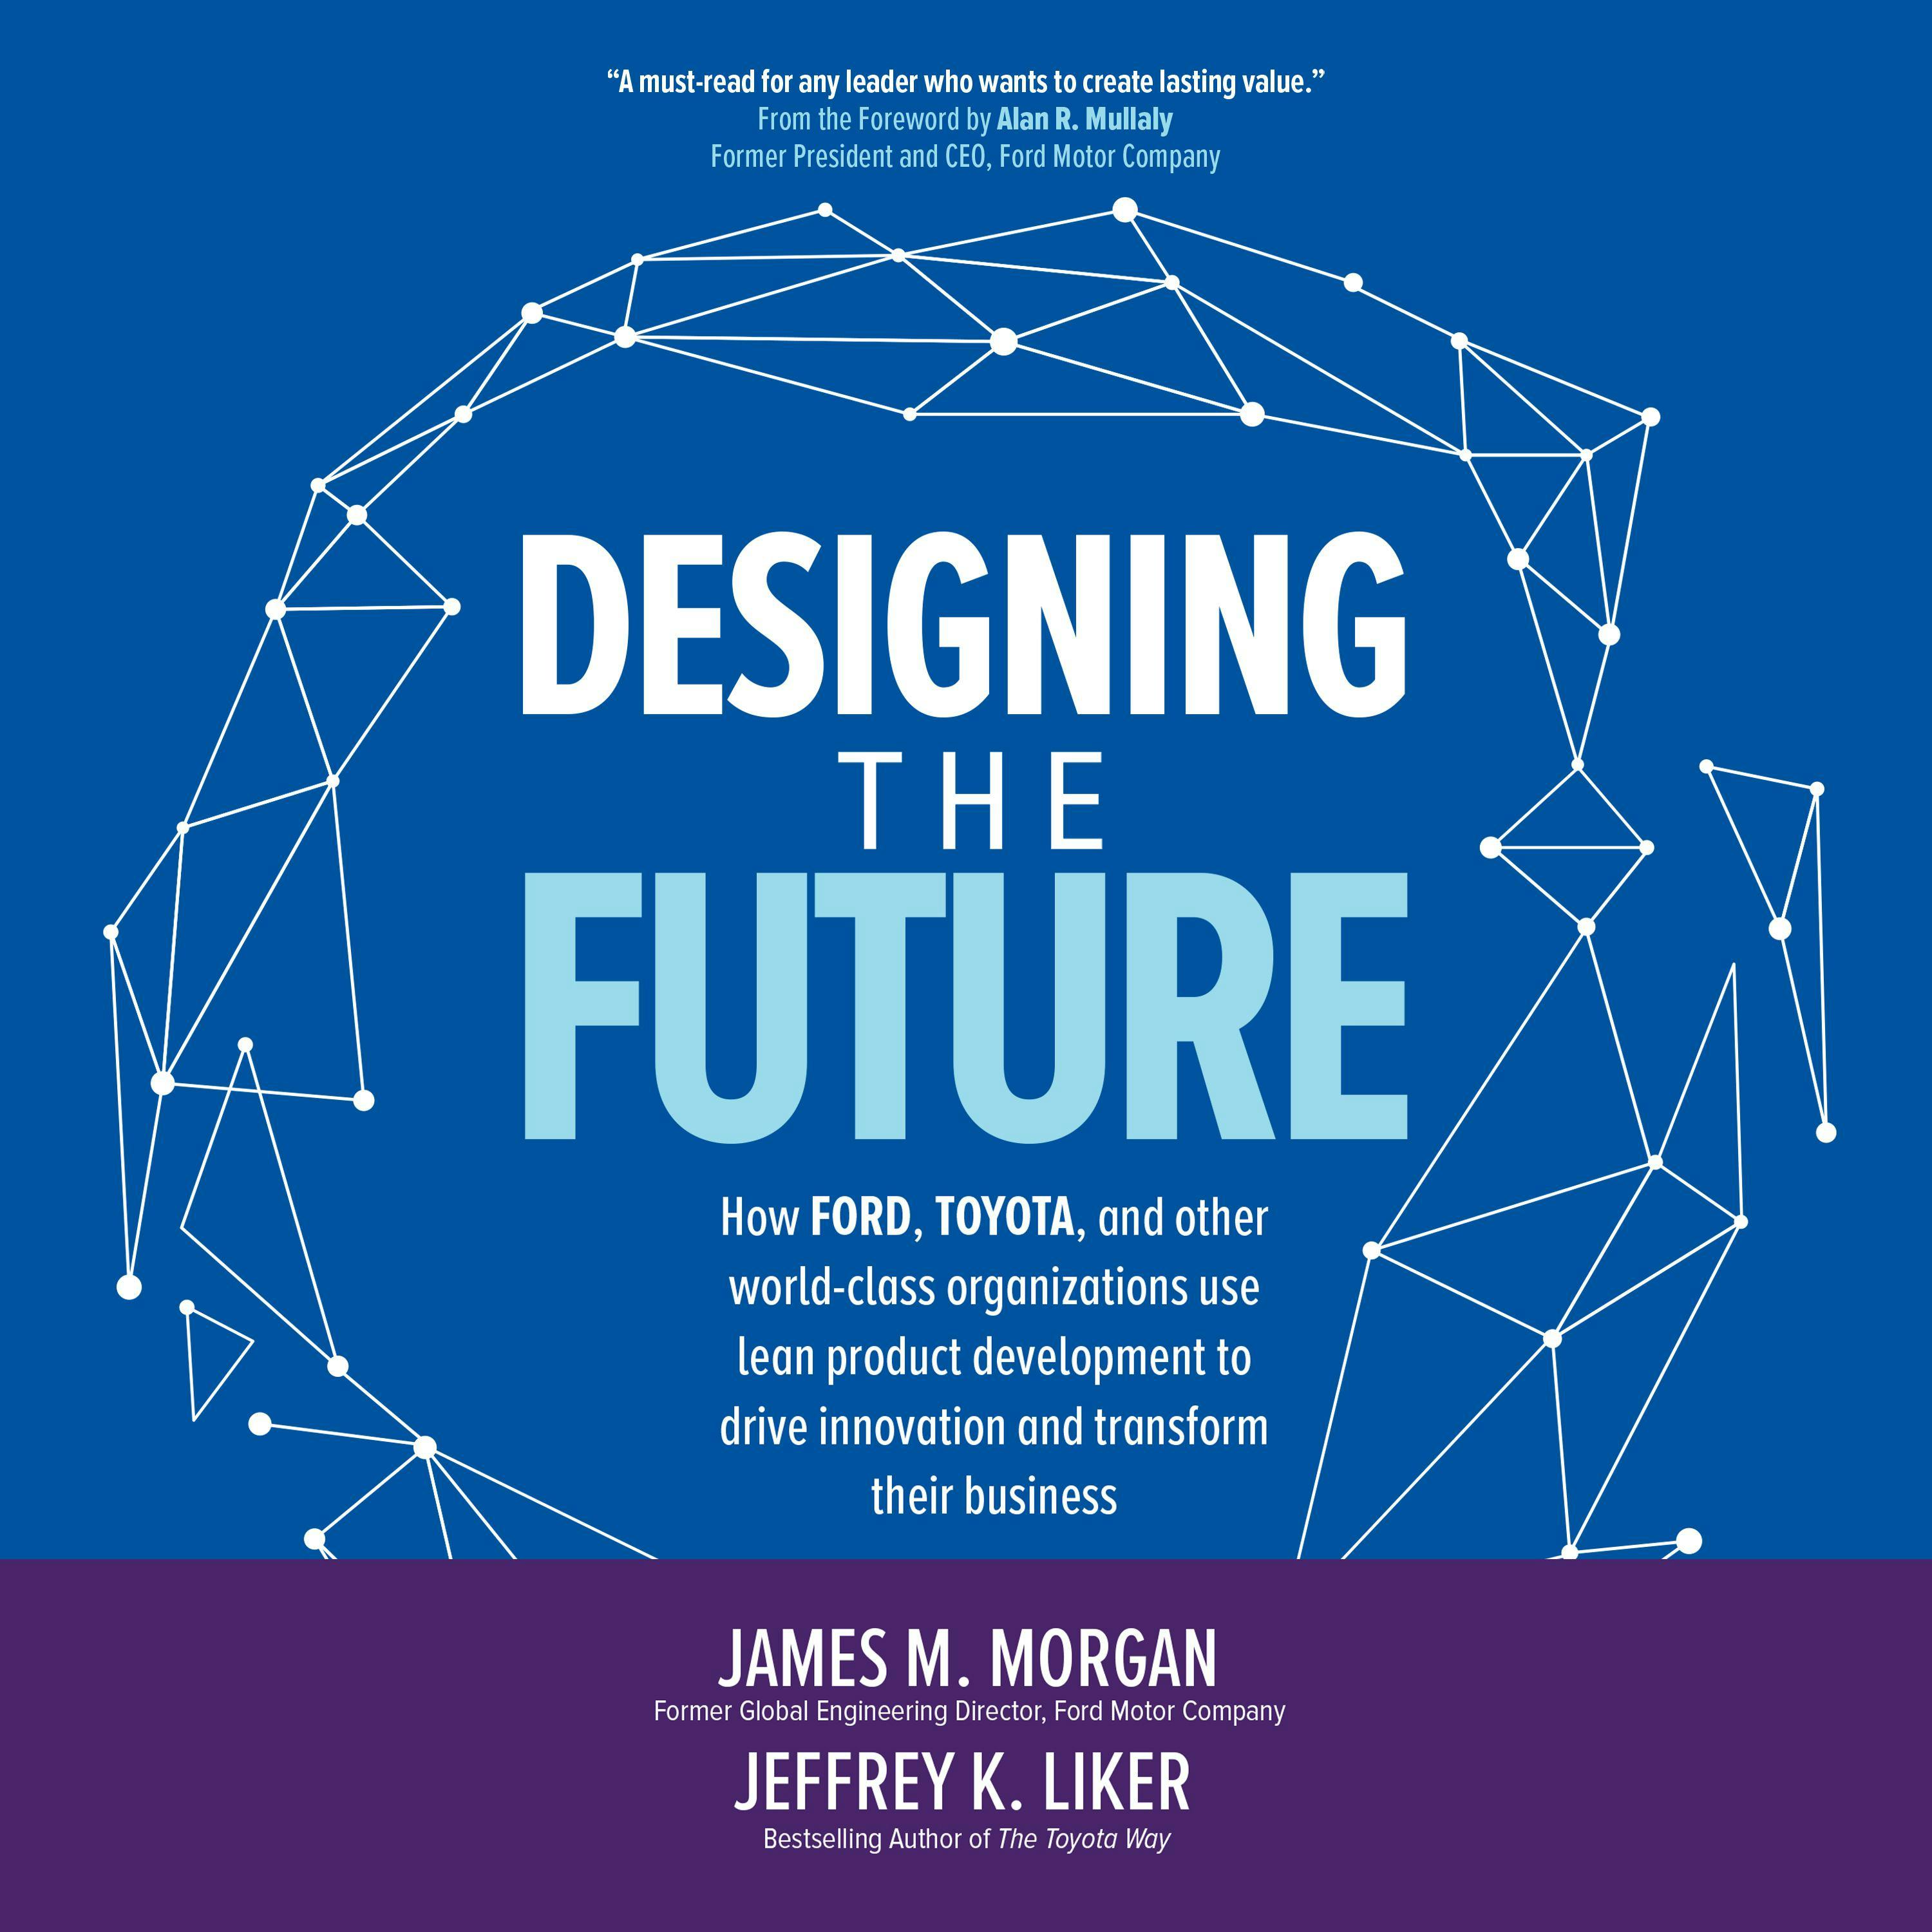 Designing the Future: How Ford, Toyota, and other World-Class Organizations Use Lean Product Development to Drive Innovation and Transform Their Business - Jeffrey K. Liker, James M. Morgan